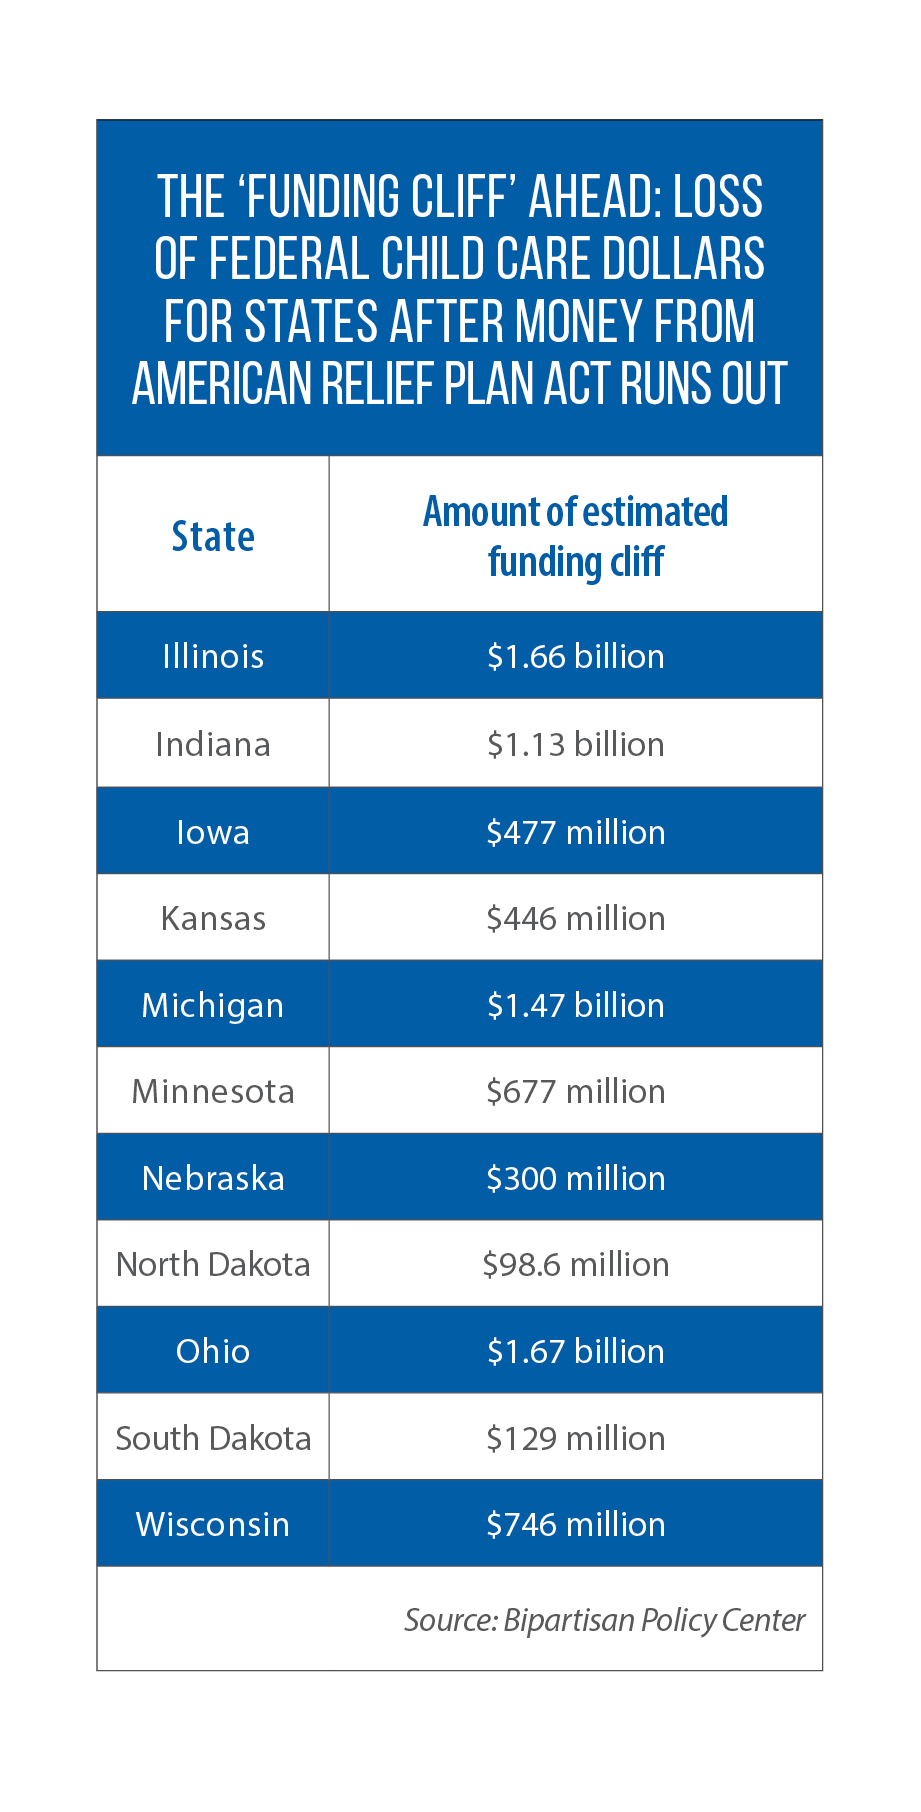 A list of estimated federal child care funding to be lost by Midwestern states when money from the American Rescue Plan runs out